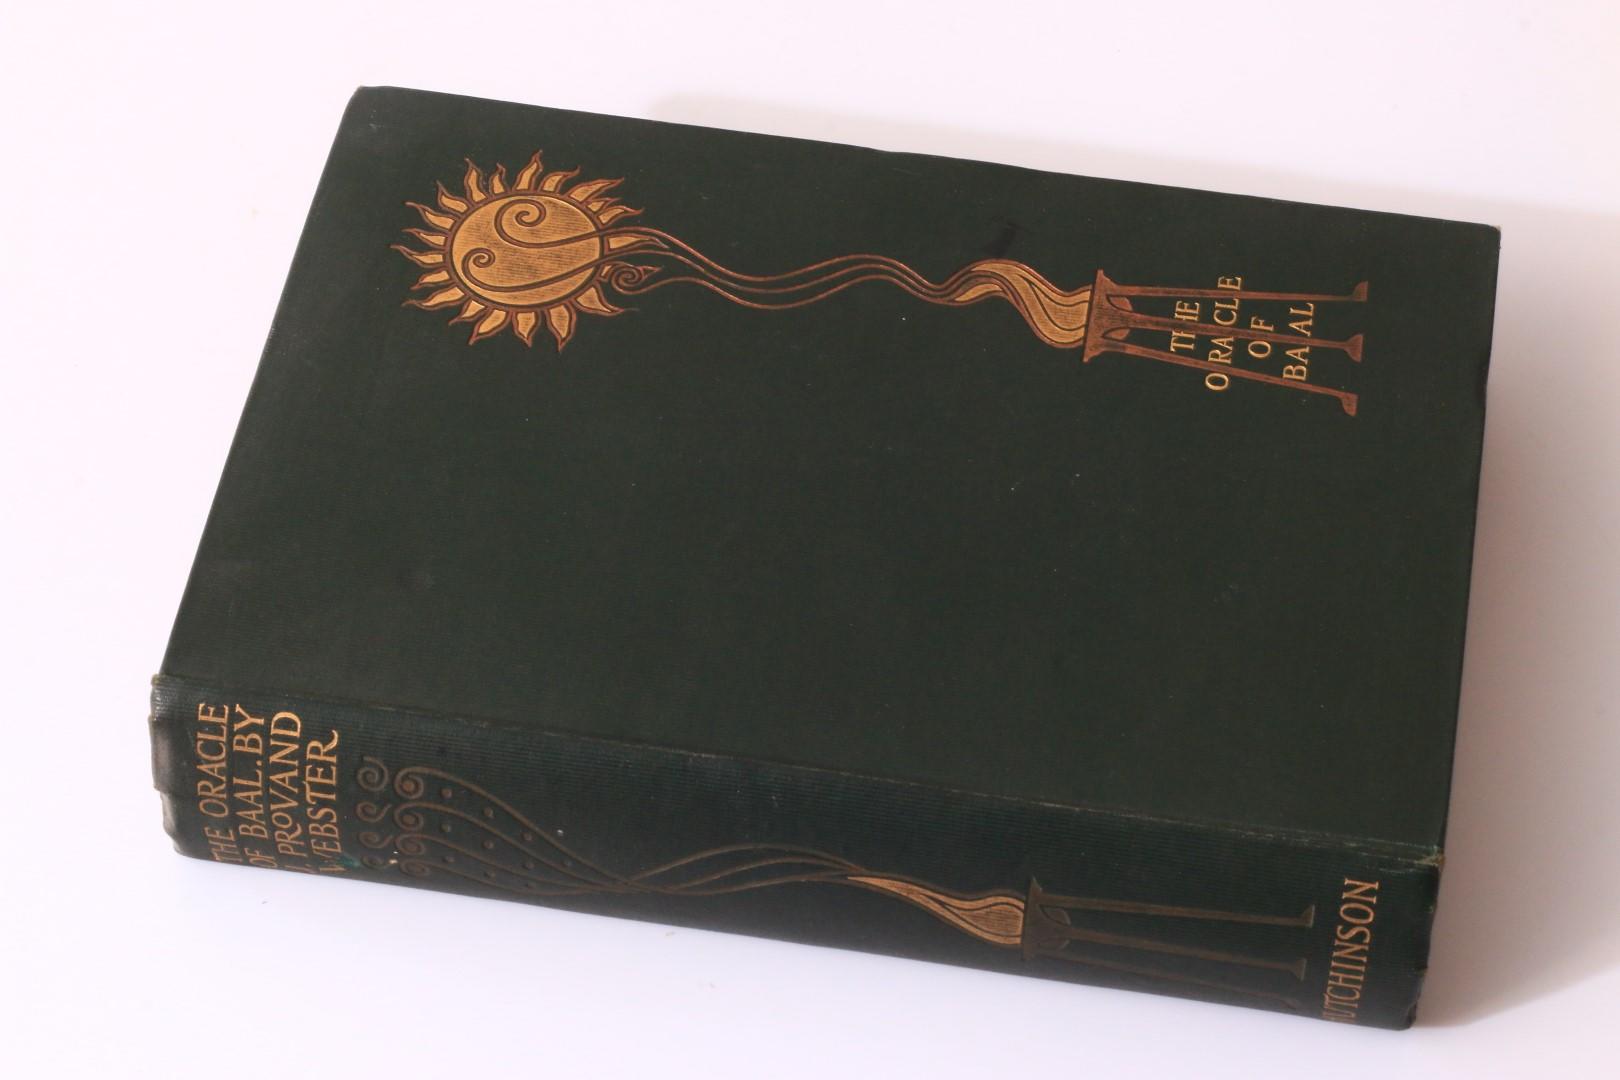 J. Provand Webster - The Oracle of Baal: A Narrative of Some Curious Events in the Life of Professor Horatio Carmichael, M.A. - Hutchinson, 1896, First Edition.